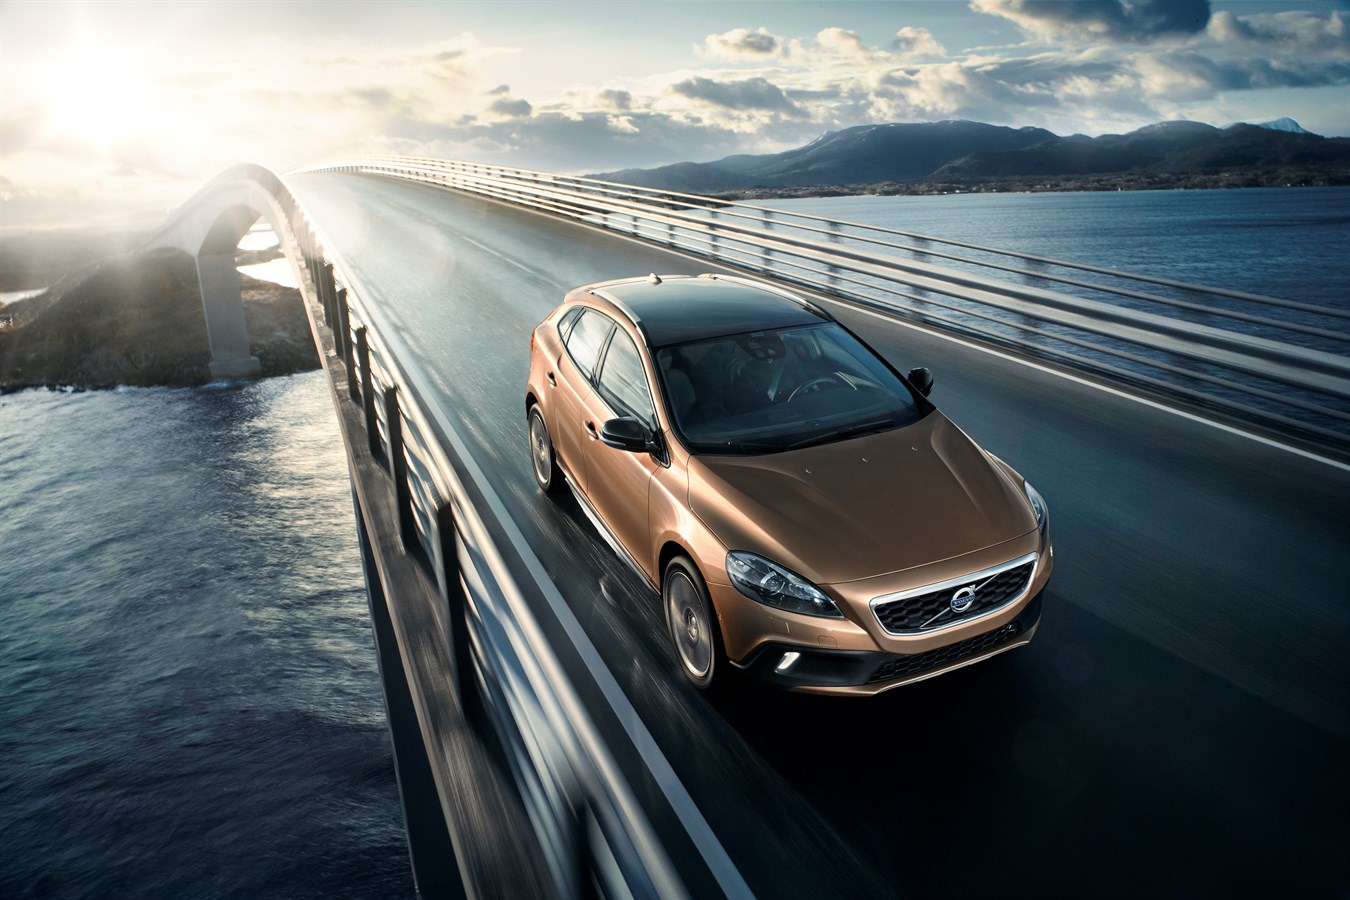 The all-new Volvo V40 Cross Country